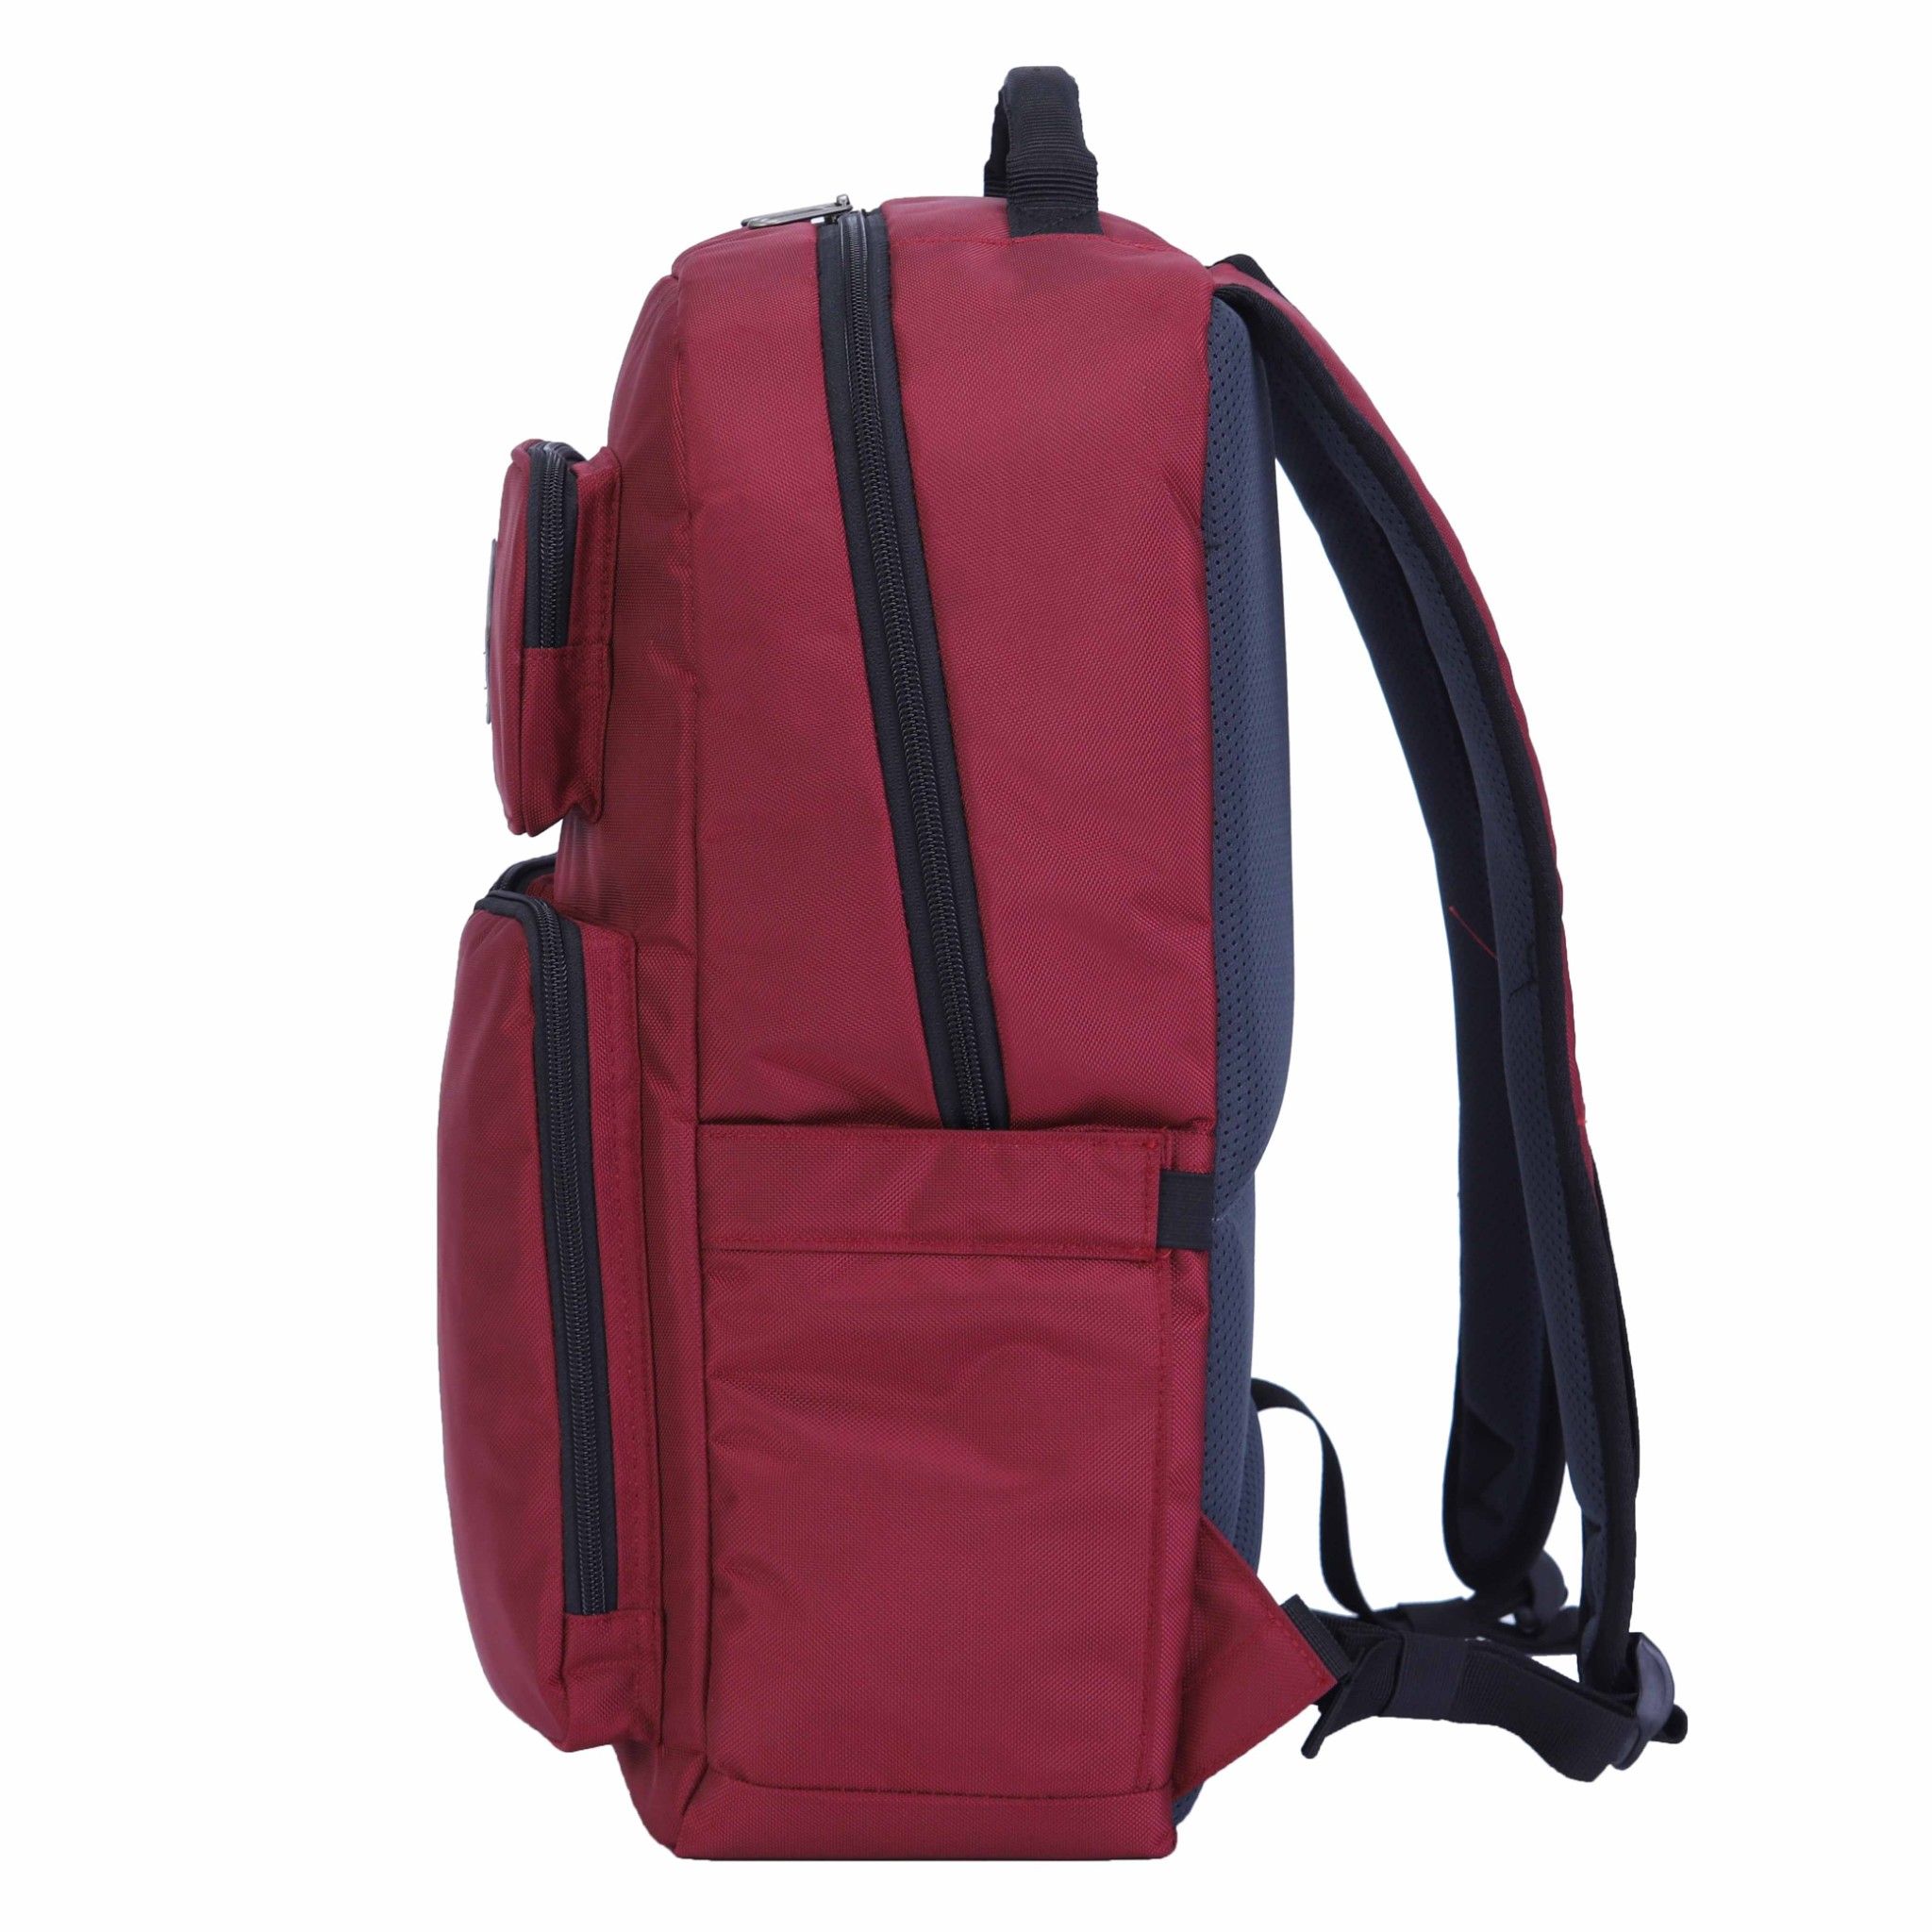  Balo Laptop UMO HUNKY D.Red BackPack 